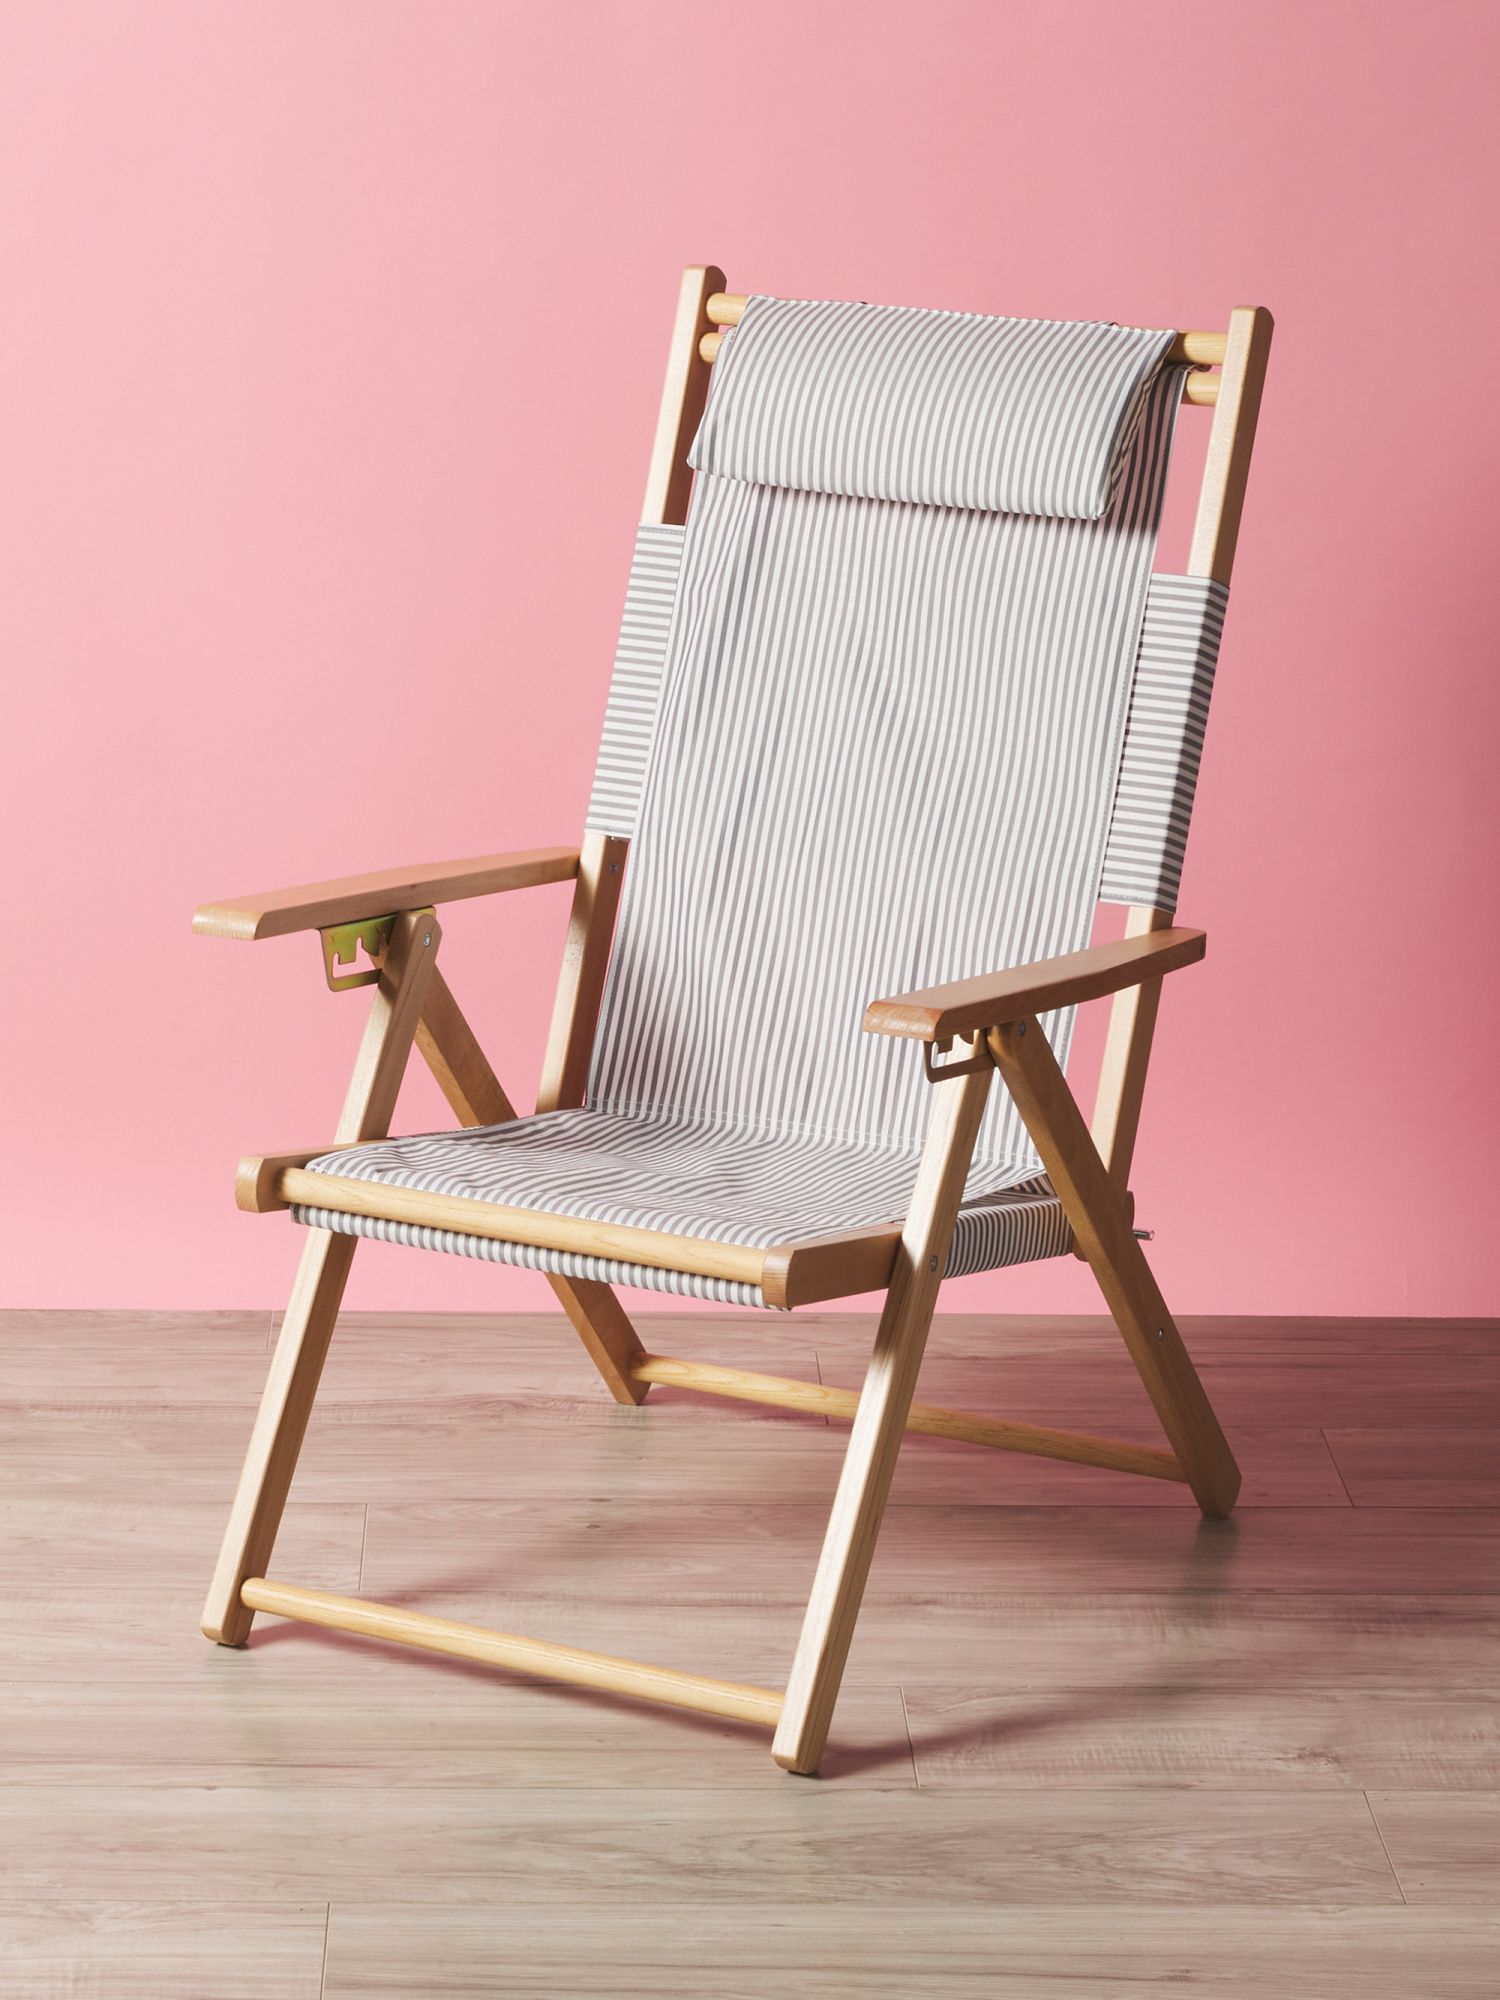 38in Striped Beach Chair With Wood Legs | HomeGoods